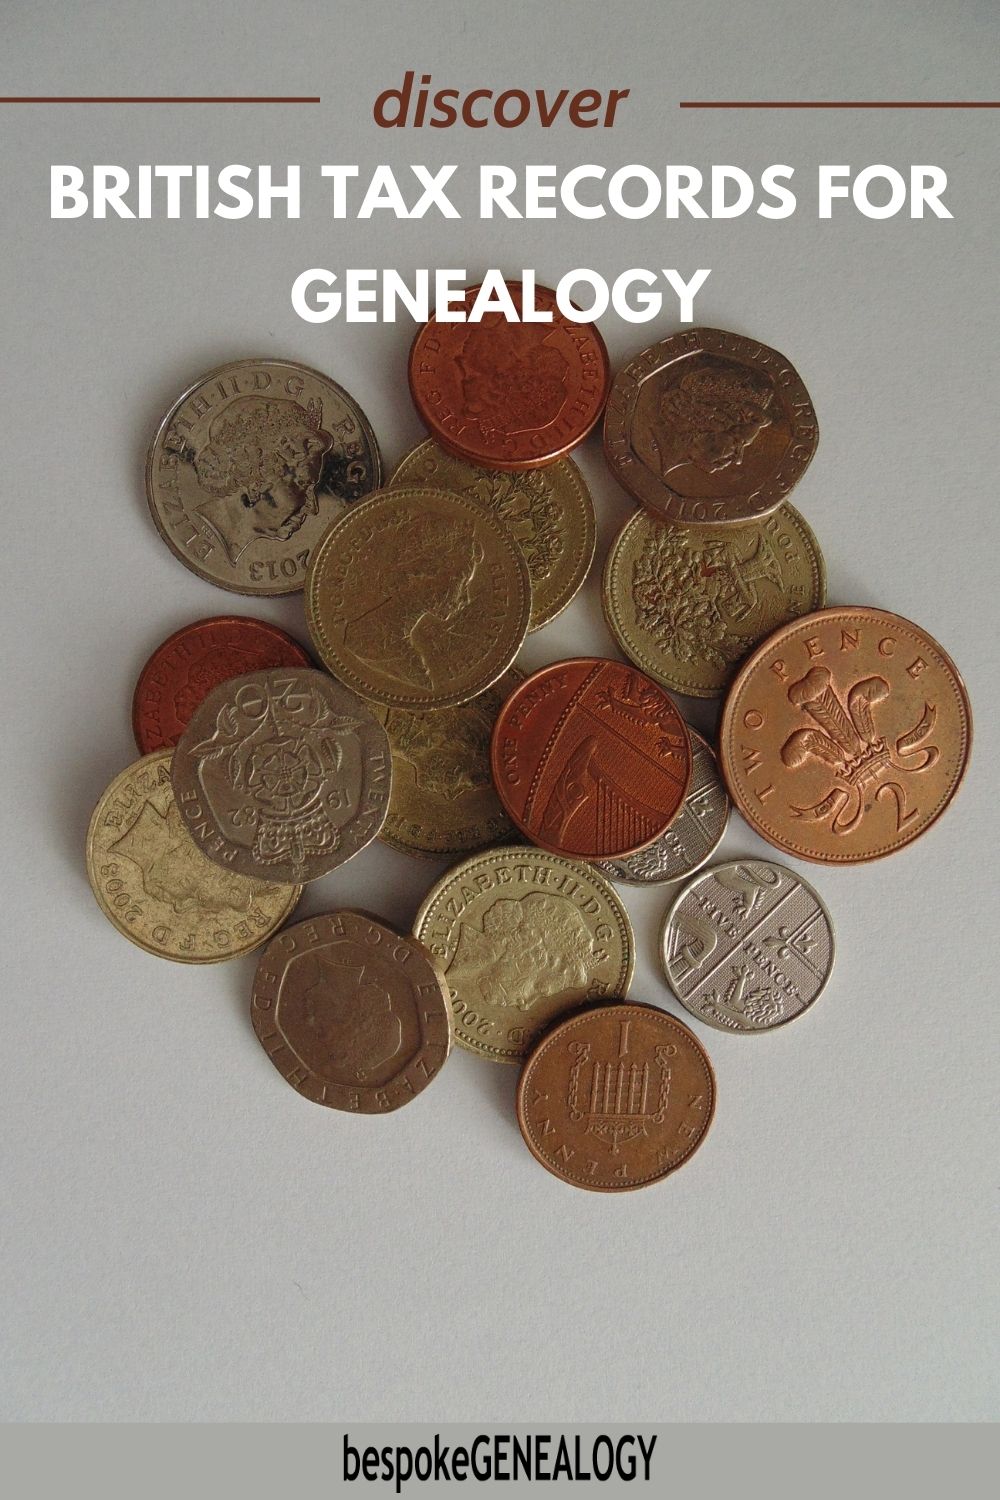 Discover British tax records for genealogy. Photo of some British coins.